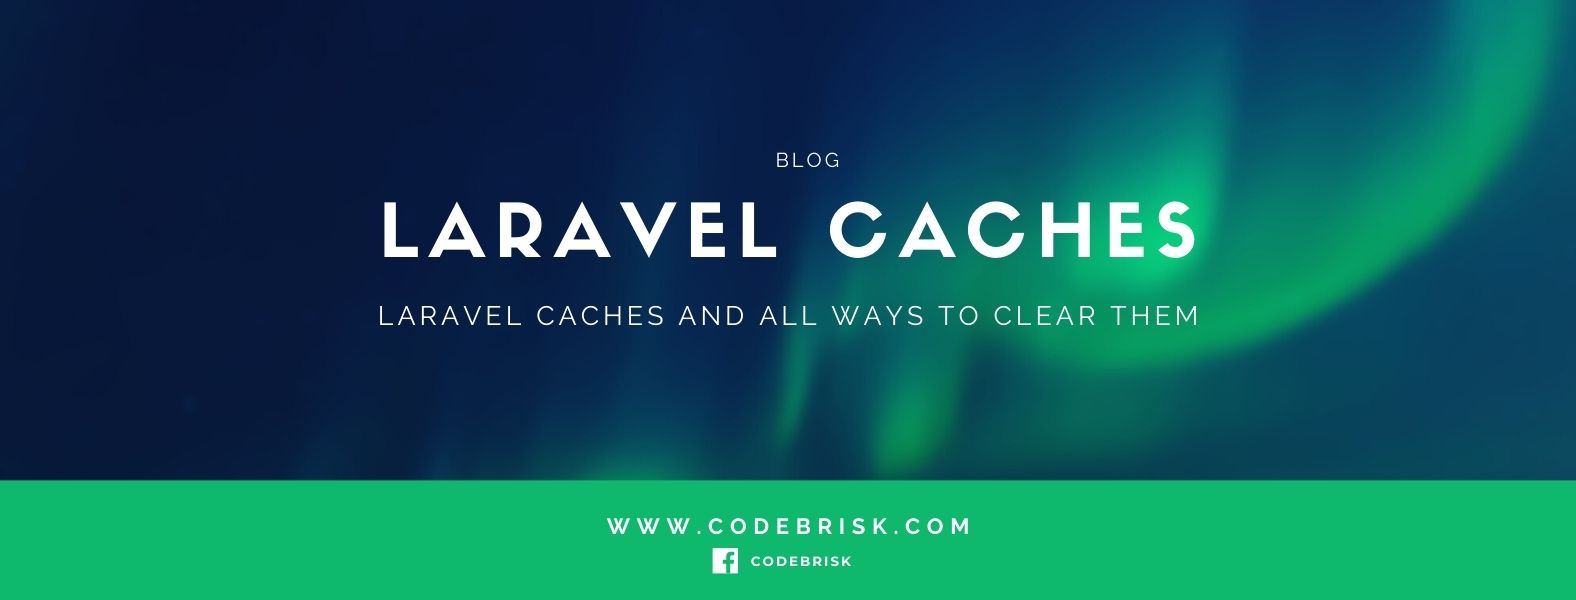 Laravel Caches And All Ways to Clear Them cover image